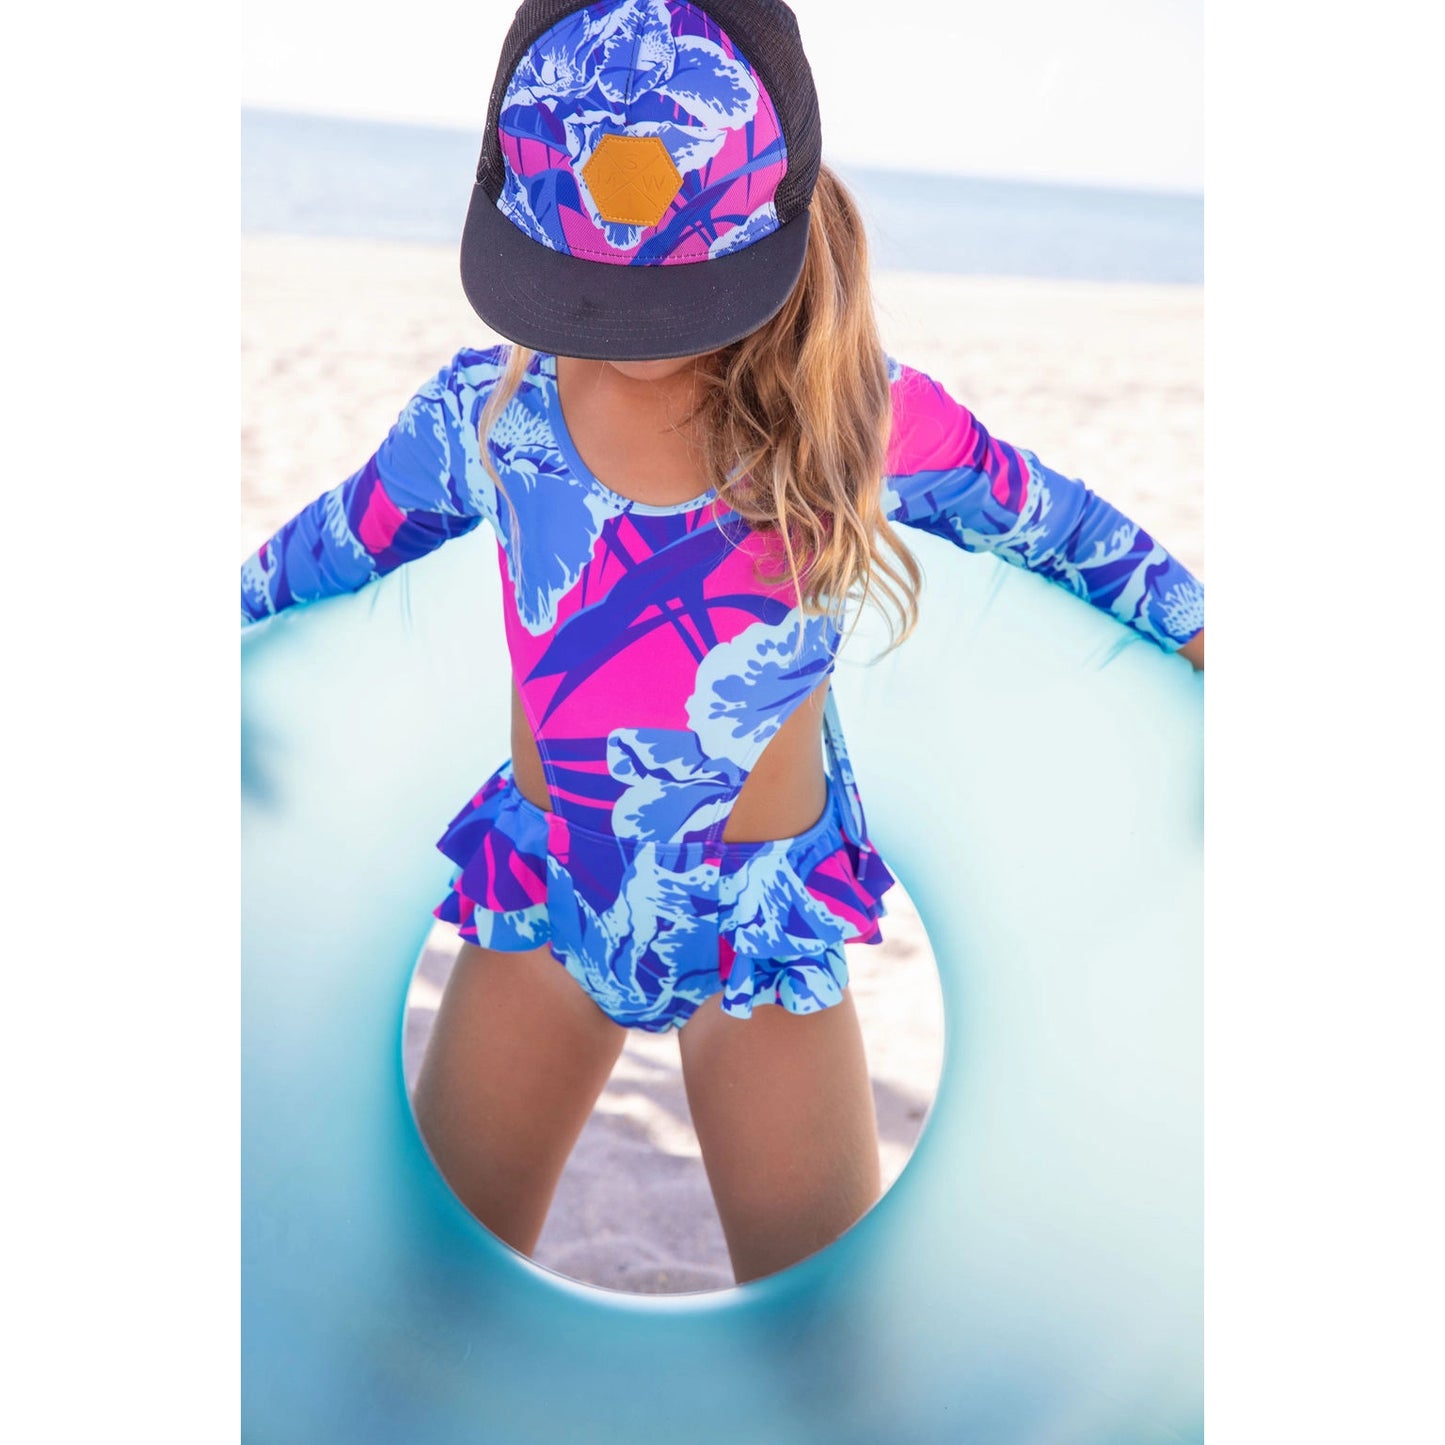 Girls "Piece of Cabo" One Piece Swimsuit